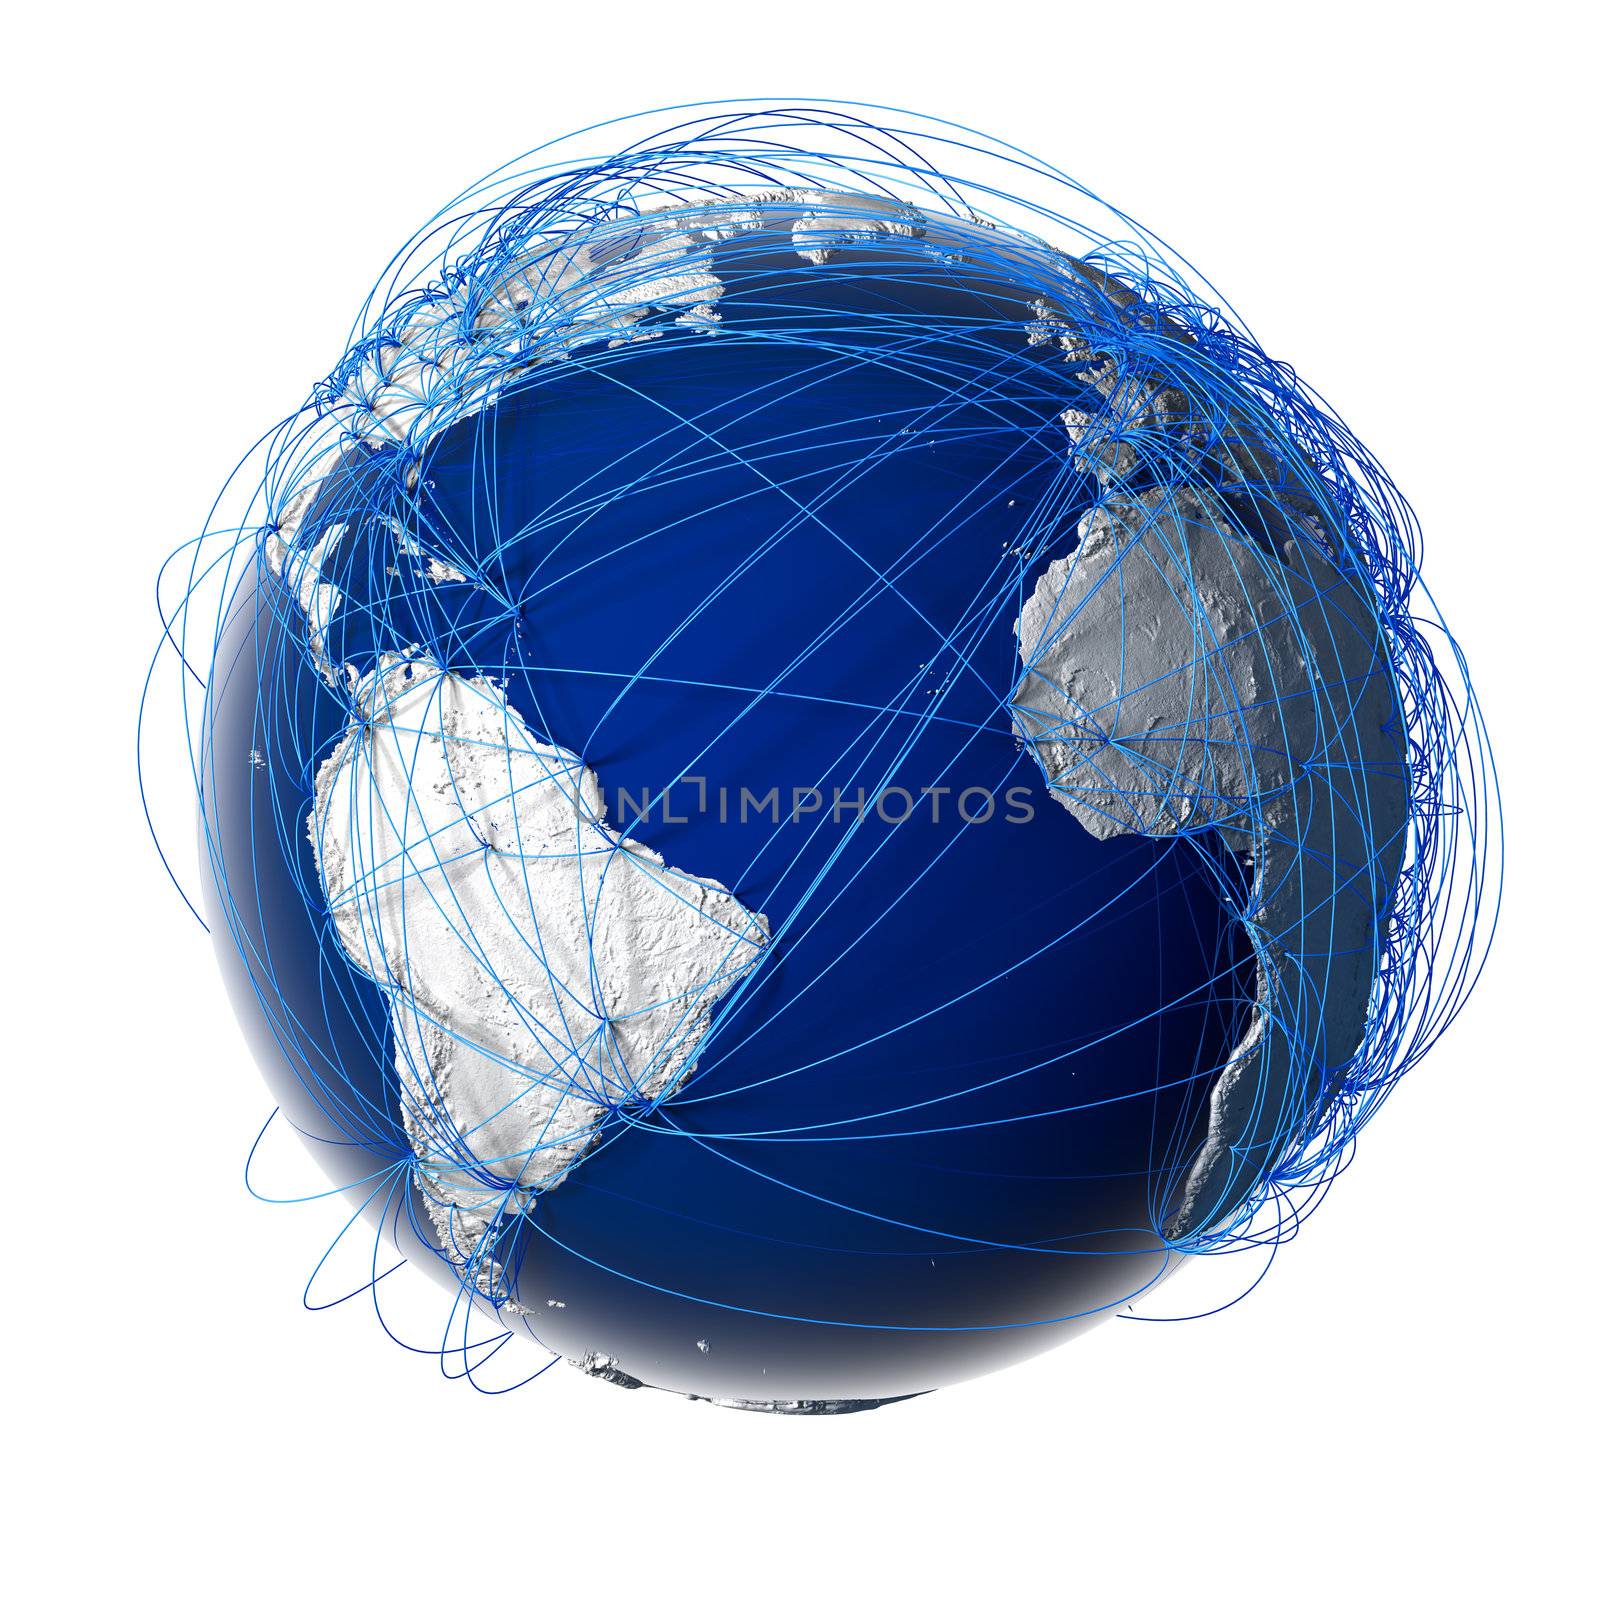 Major global aviation routes on the globe by Antartis